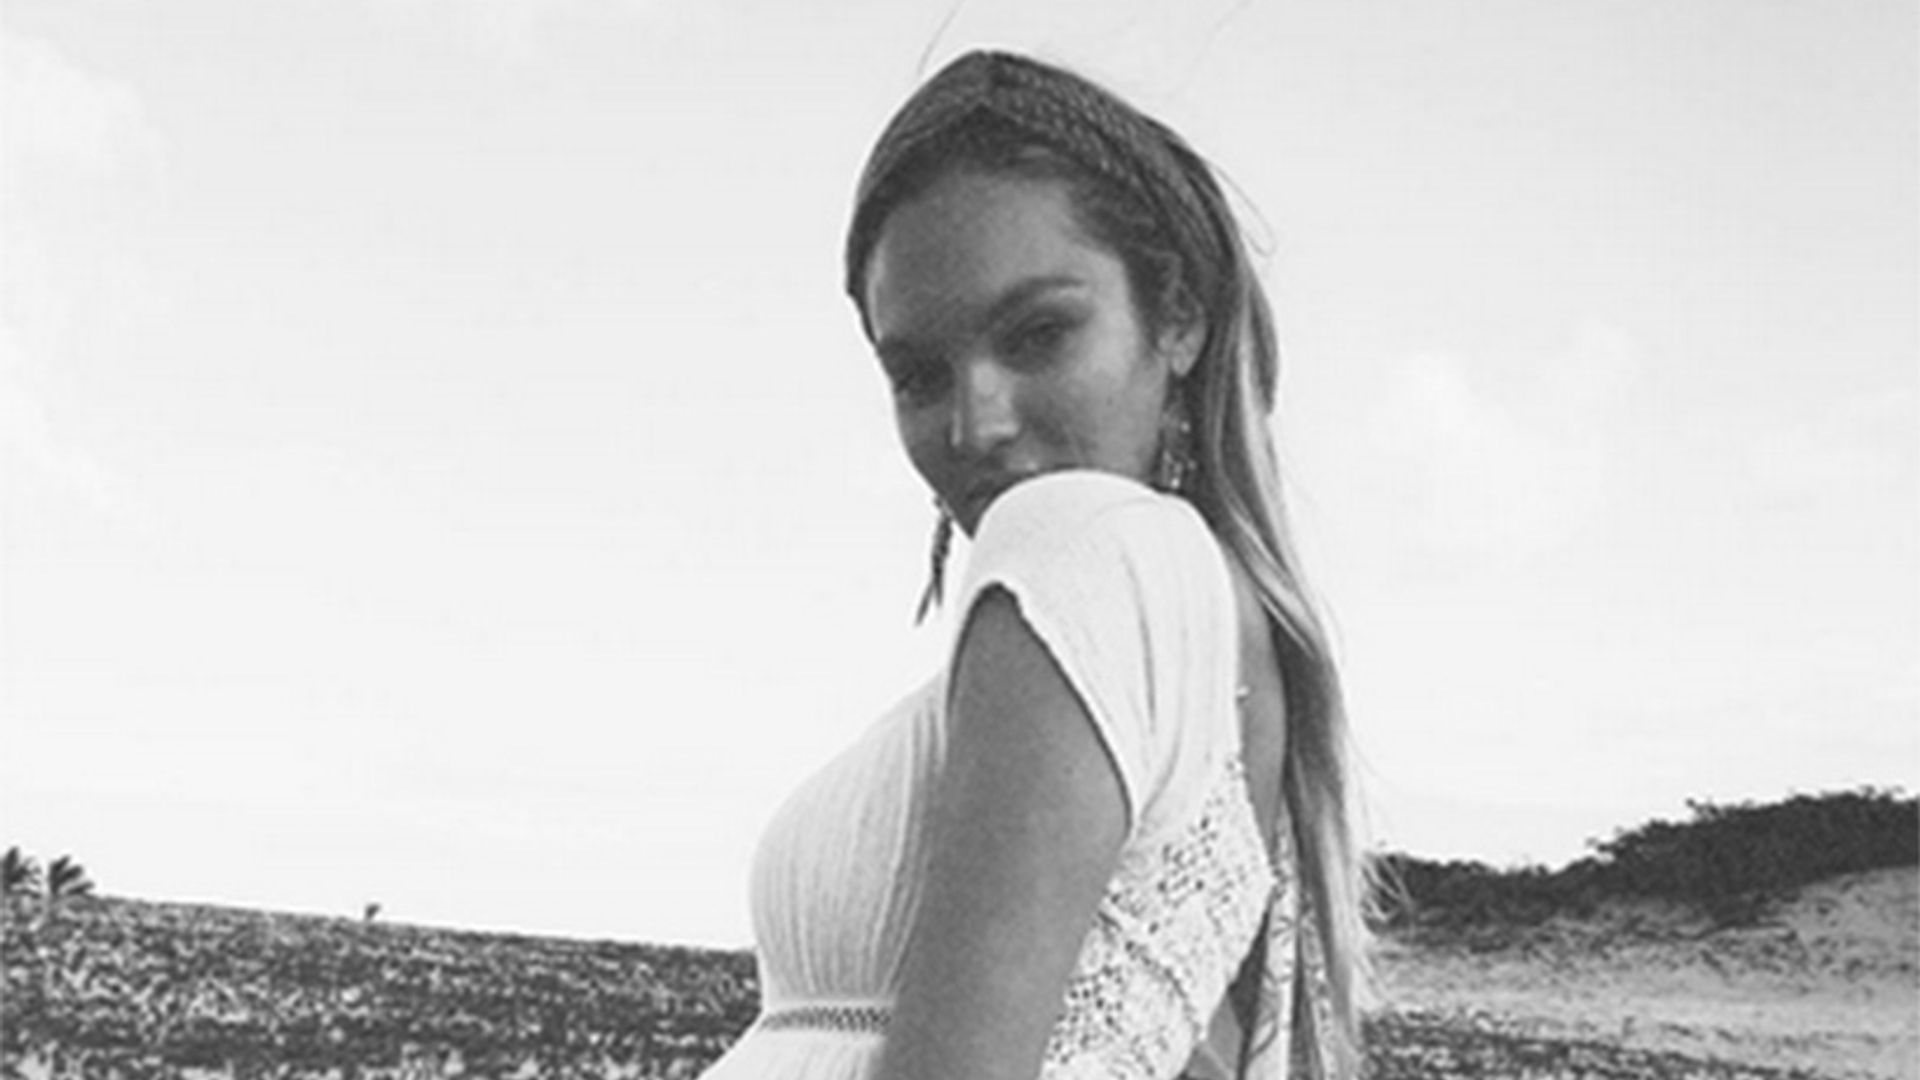 Candice Swanepoel continues to show off beautiful bump as due date nears